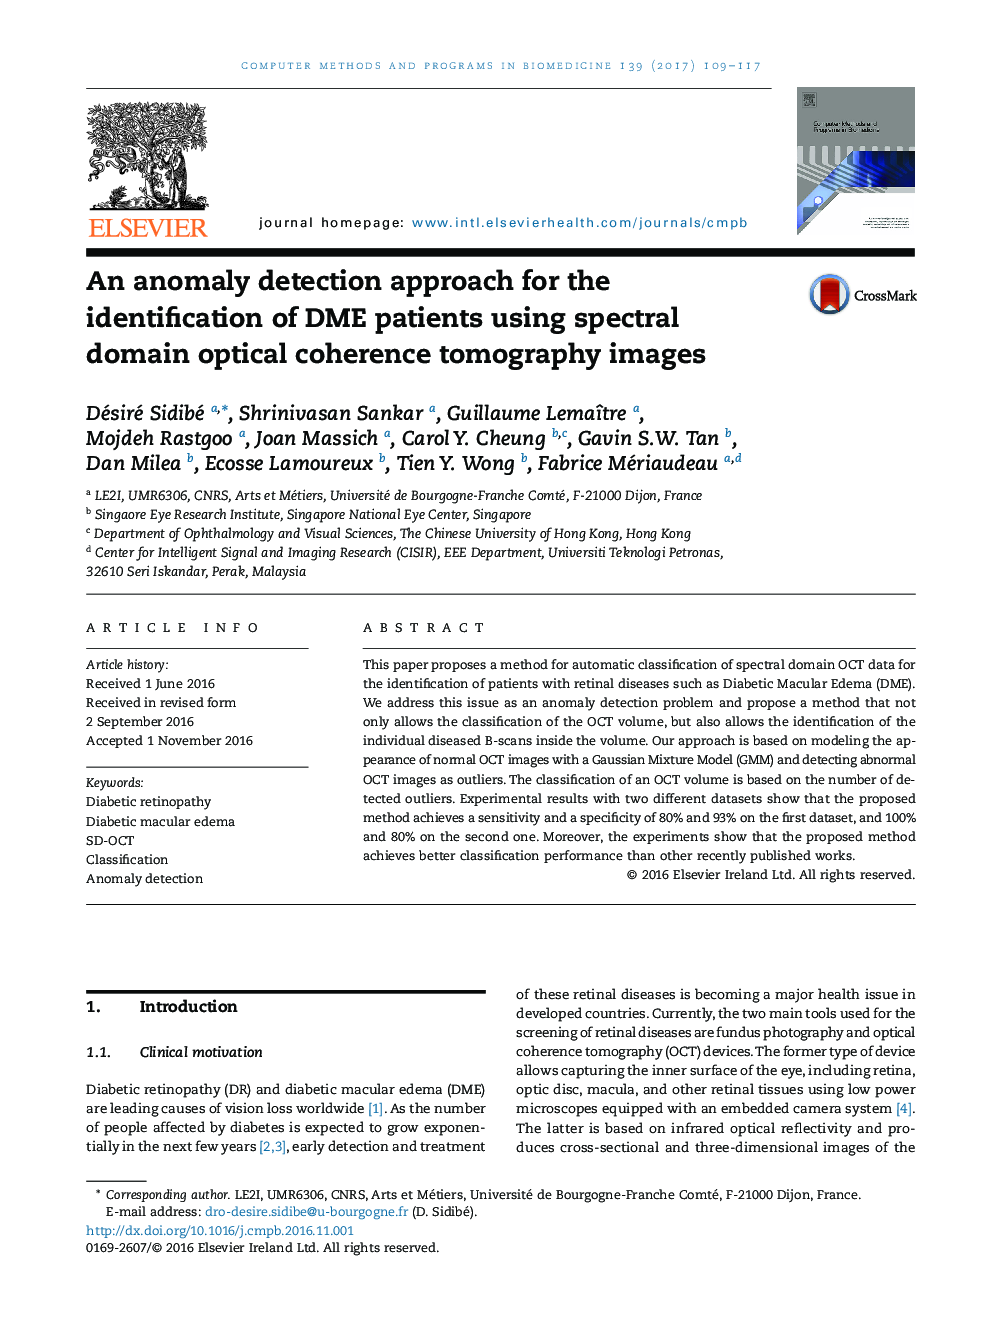 An anomaly detection approach for the identification of DME patients using spectral domain optical coherence tomography images